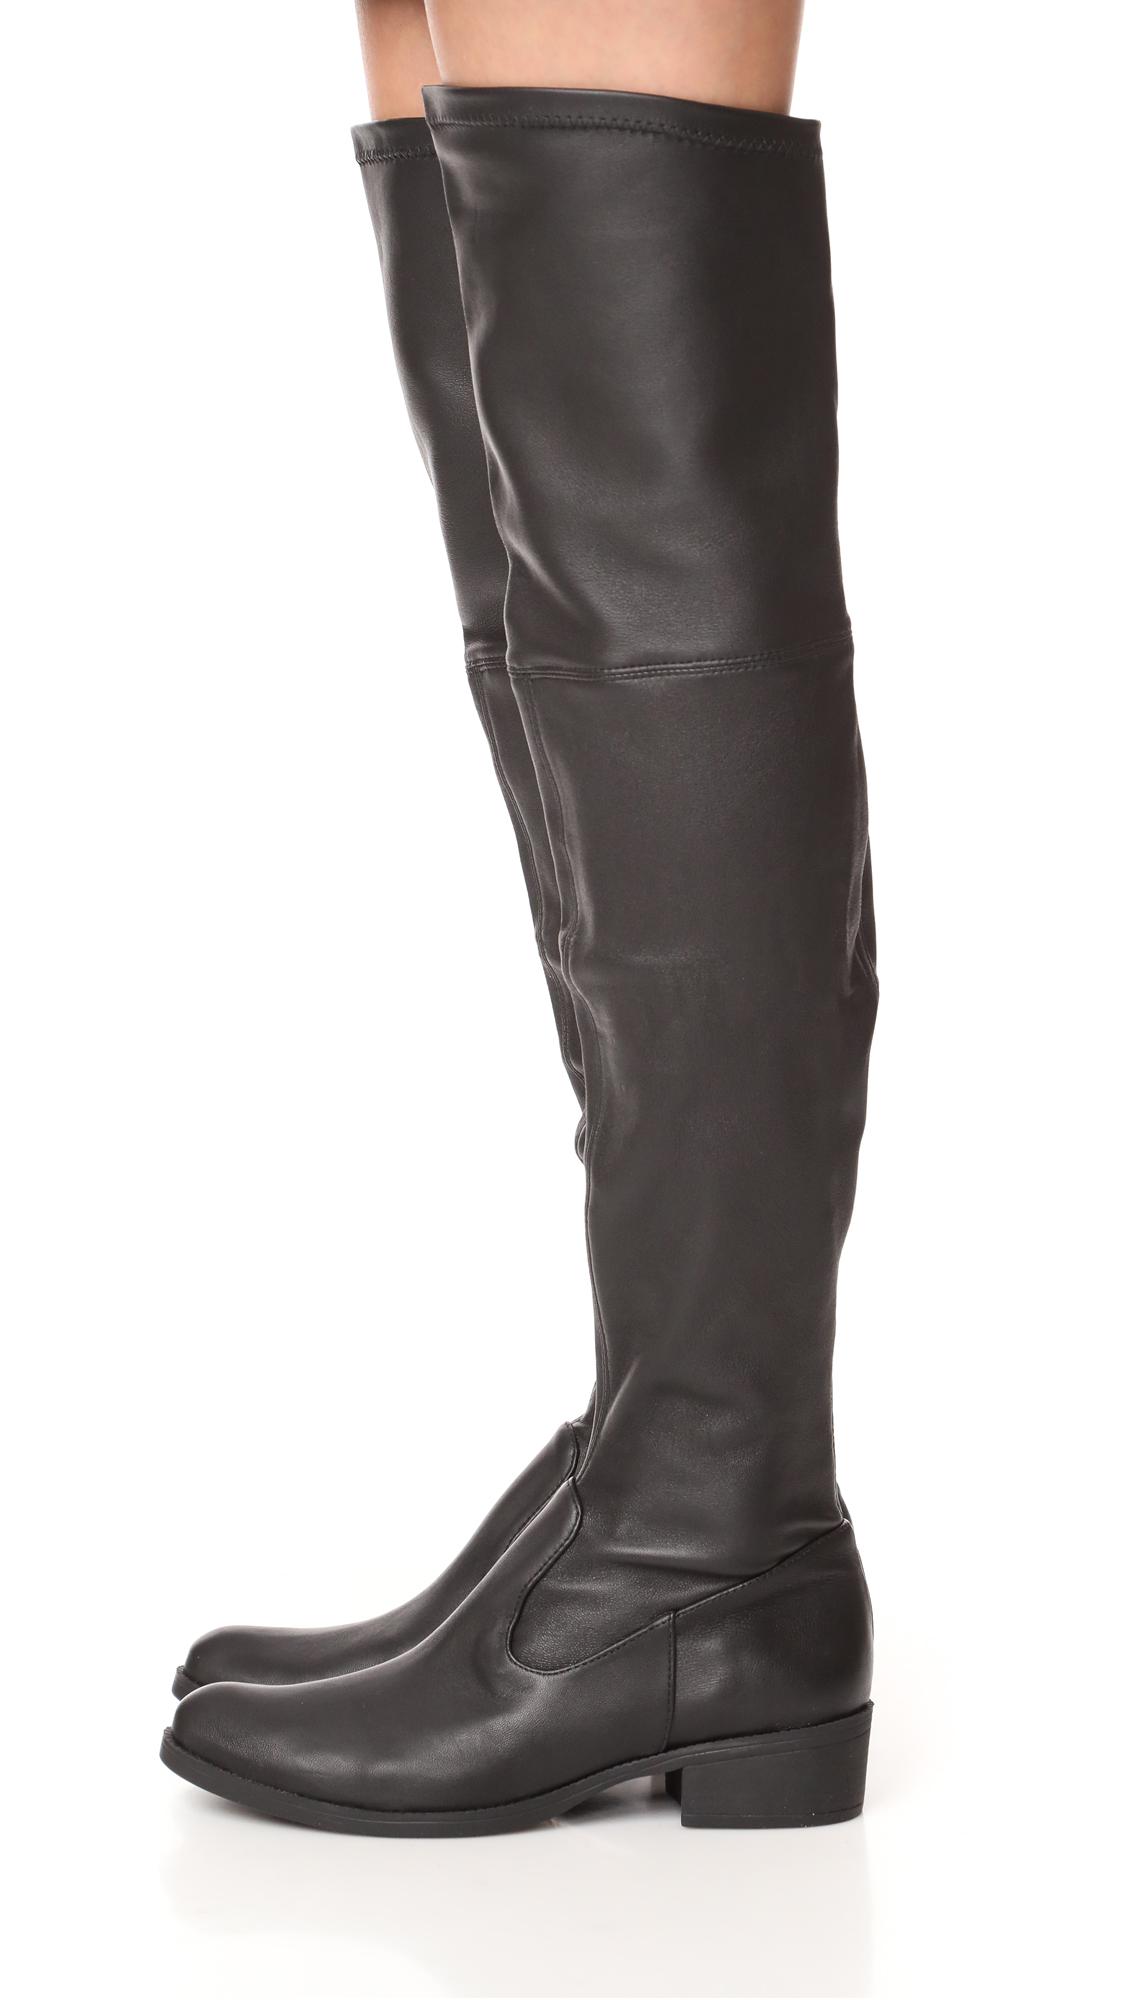 Schutz Leather Rovari Over The Knee Stretch Boots in Black - Lyst